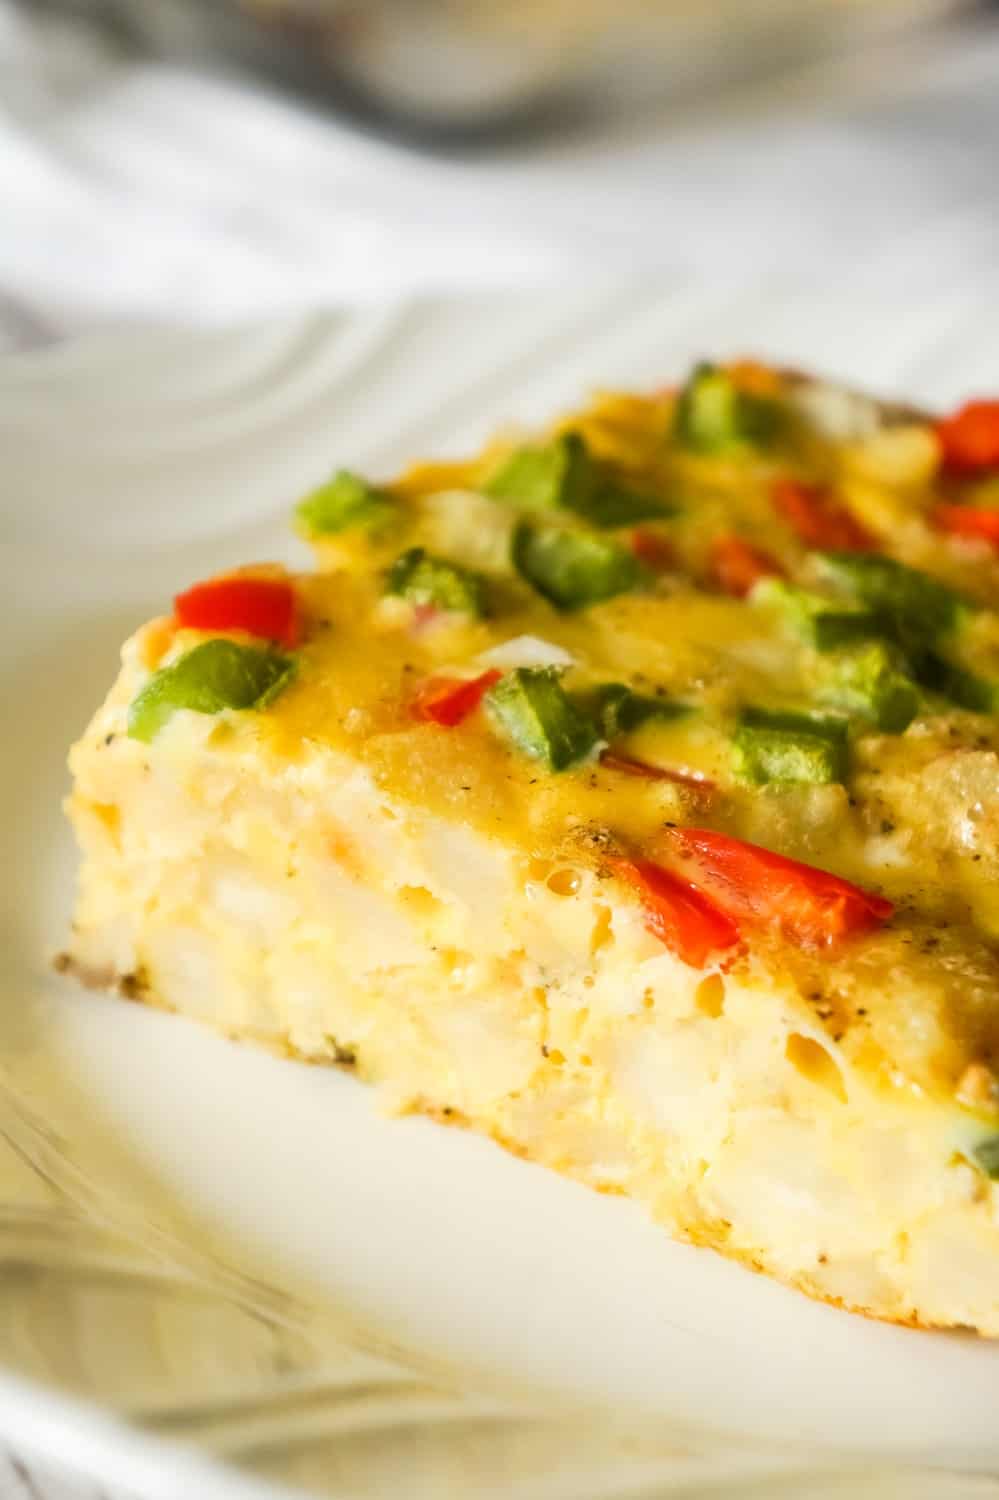 Egg Casserole with Hash Browns is a an easy breakfast recipe made with diced hash brown potatoes and loaded with onions, green peppers and red peppers.